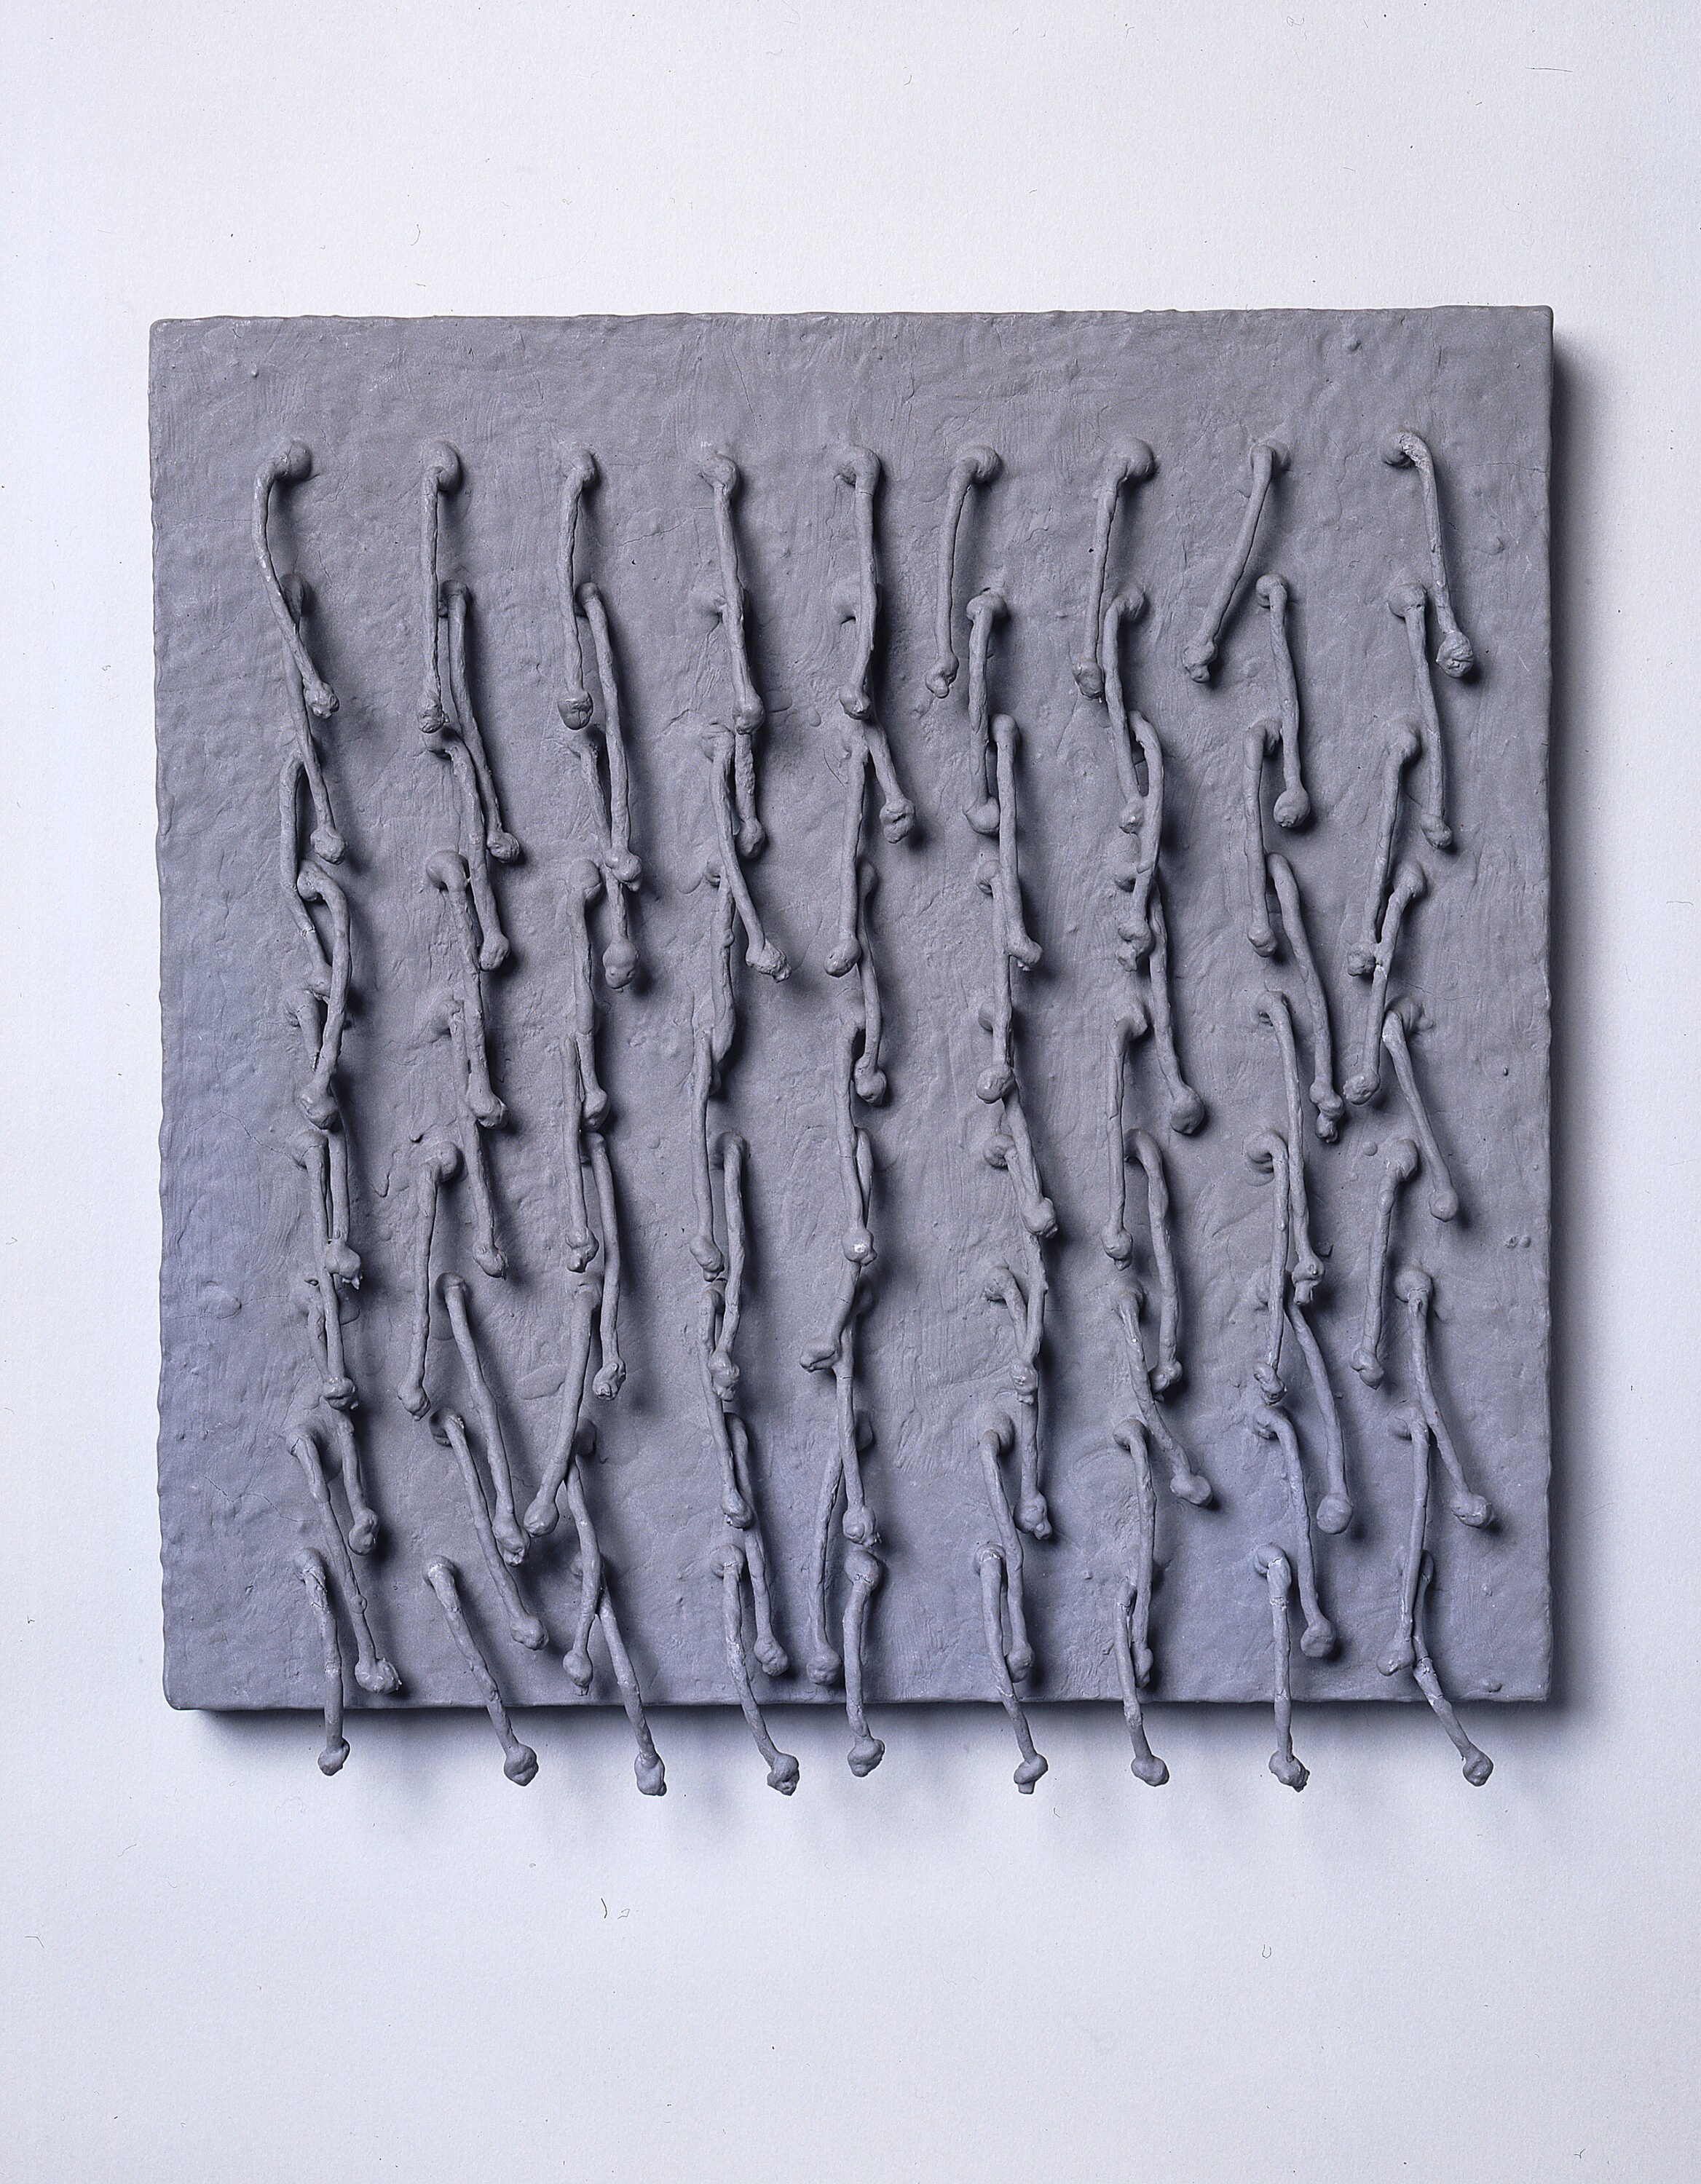 Short, knotted cords, arranged in a symmetrical 9-by-9 grid, emerge from a square panel and hang down. Thick, matte paint in a silvery gray color coats the entire piece, adding rough texture to the panel and stiffening the cords into positions that cast irregular shadows across the work’s surface.